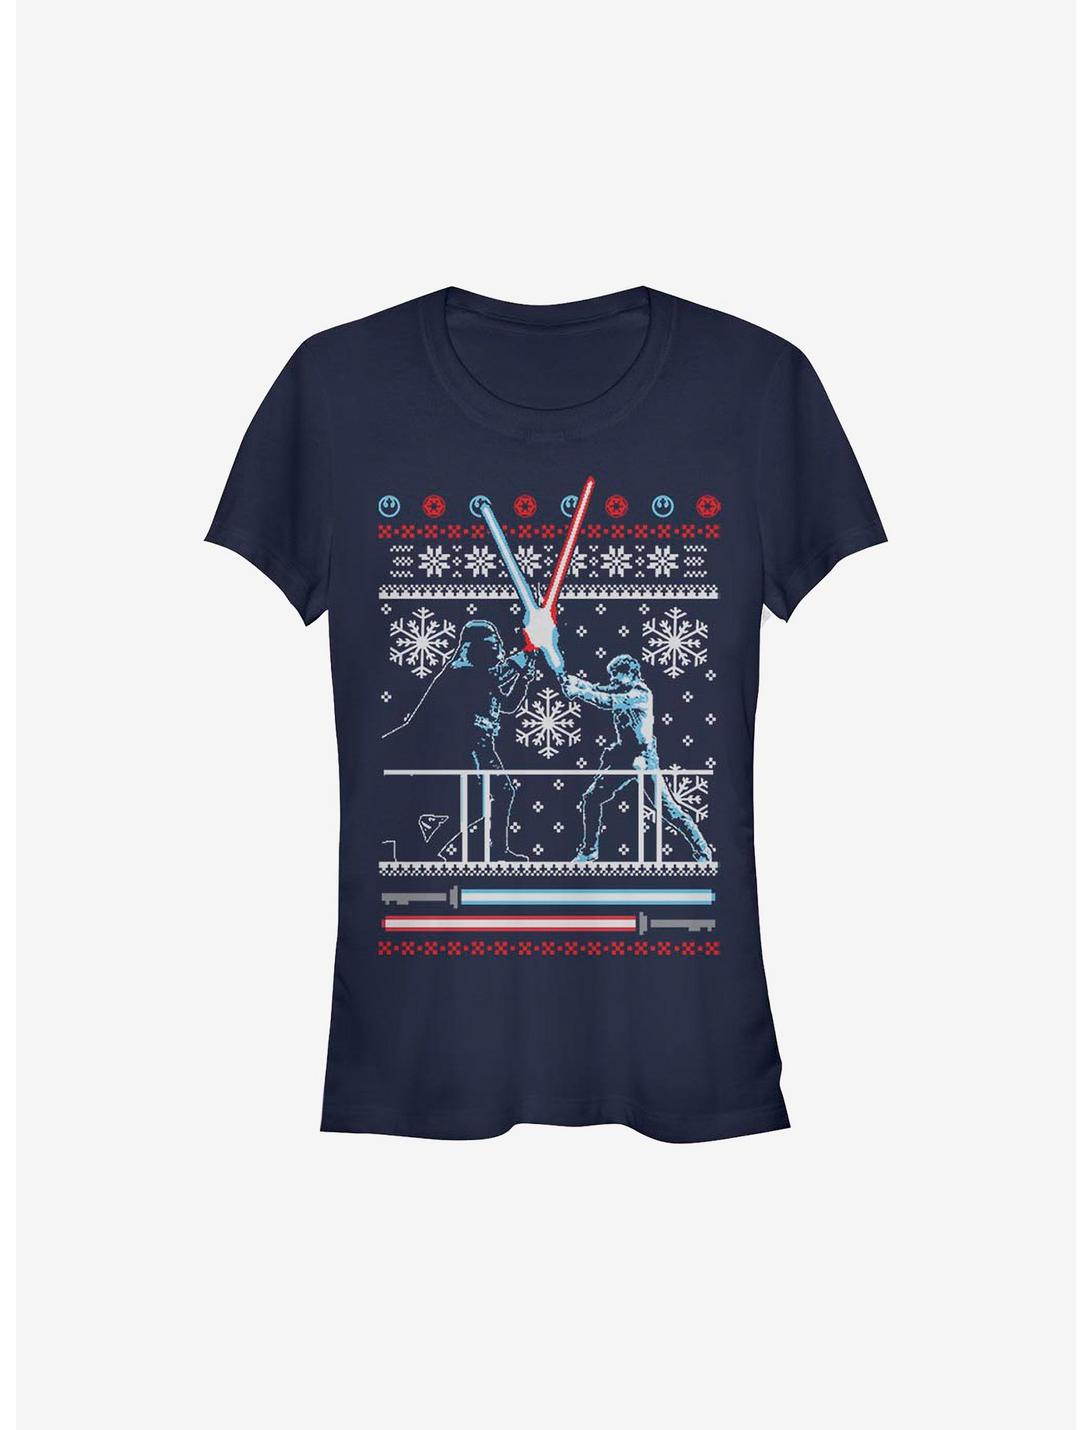 Star Wars Fued Ugly Christmas Sweater Girls T-Shirt, NAVY, hi-res